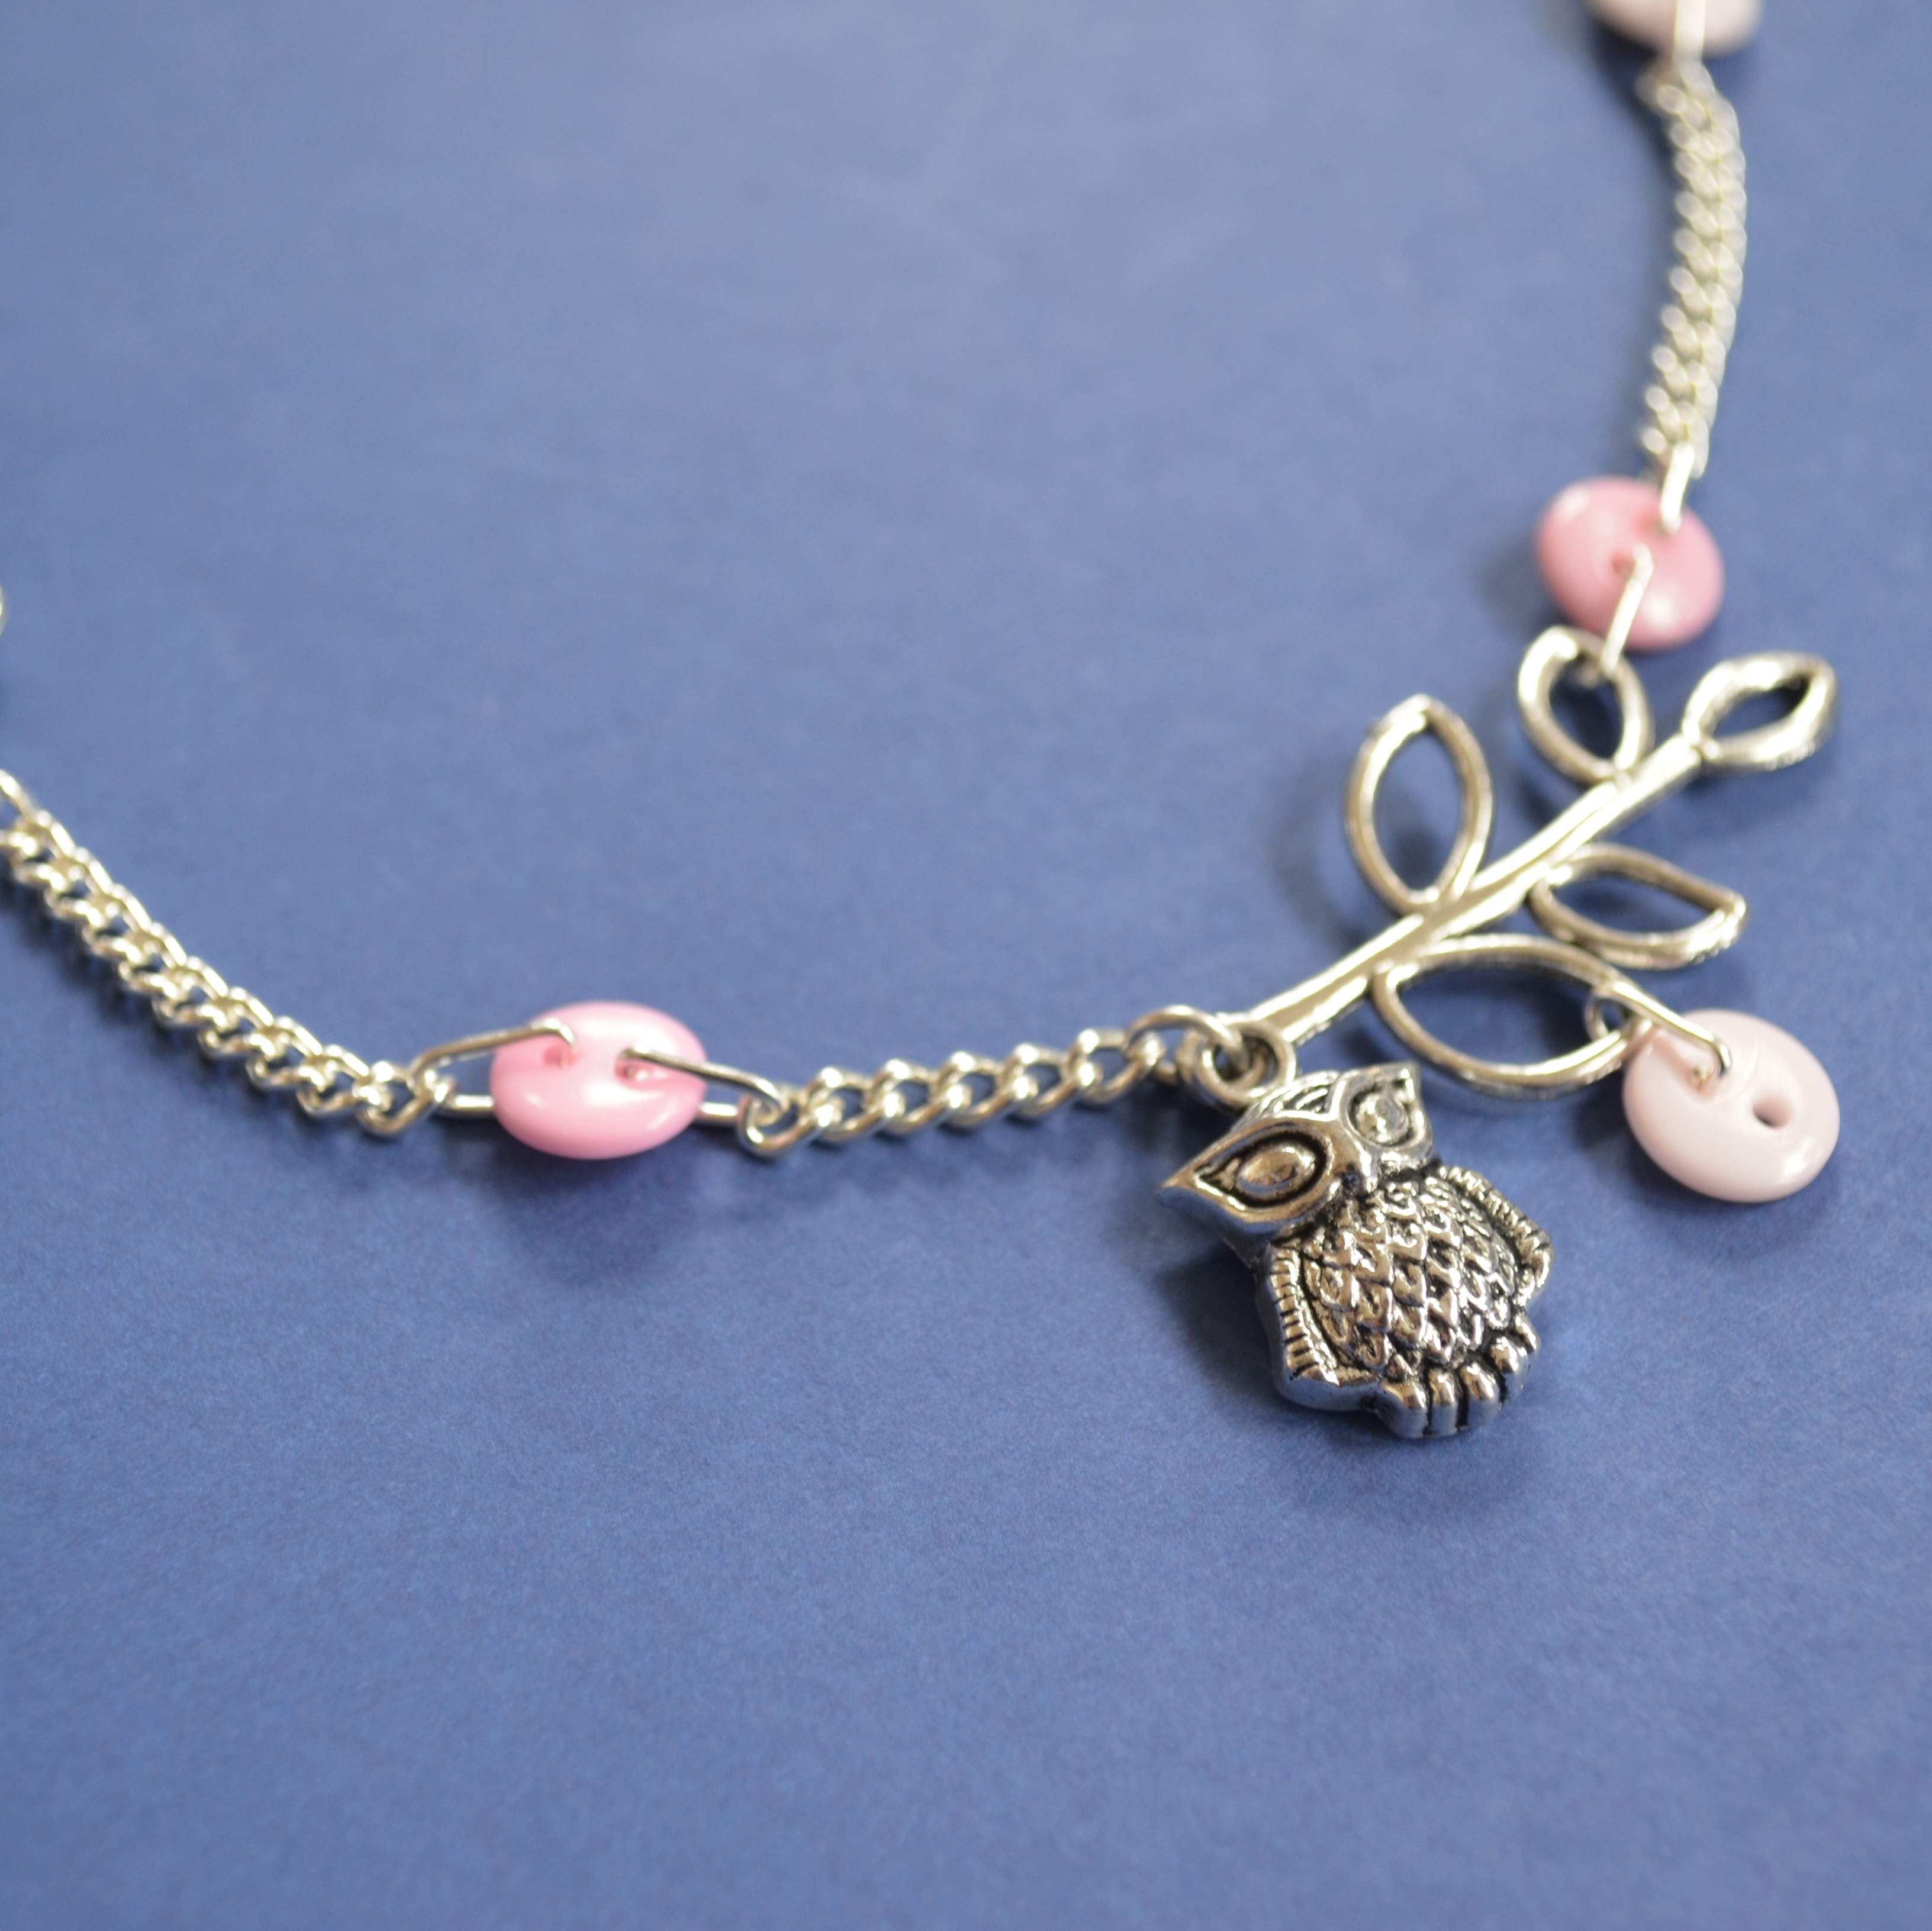 Pink Owl & Leaves Necklace